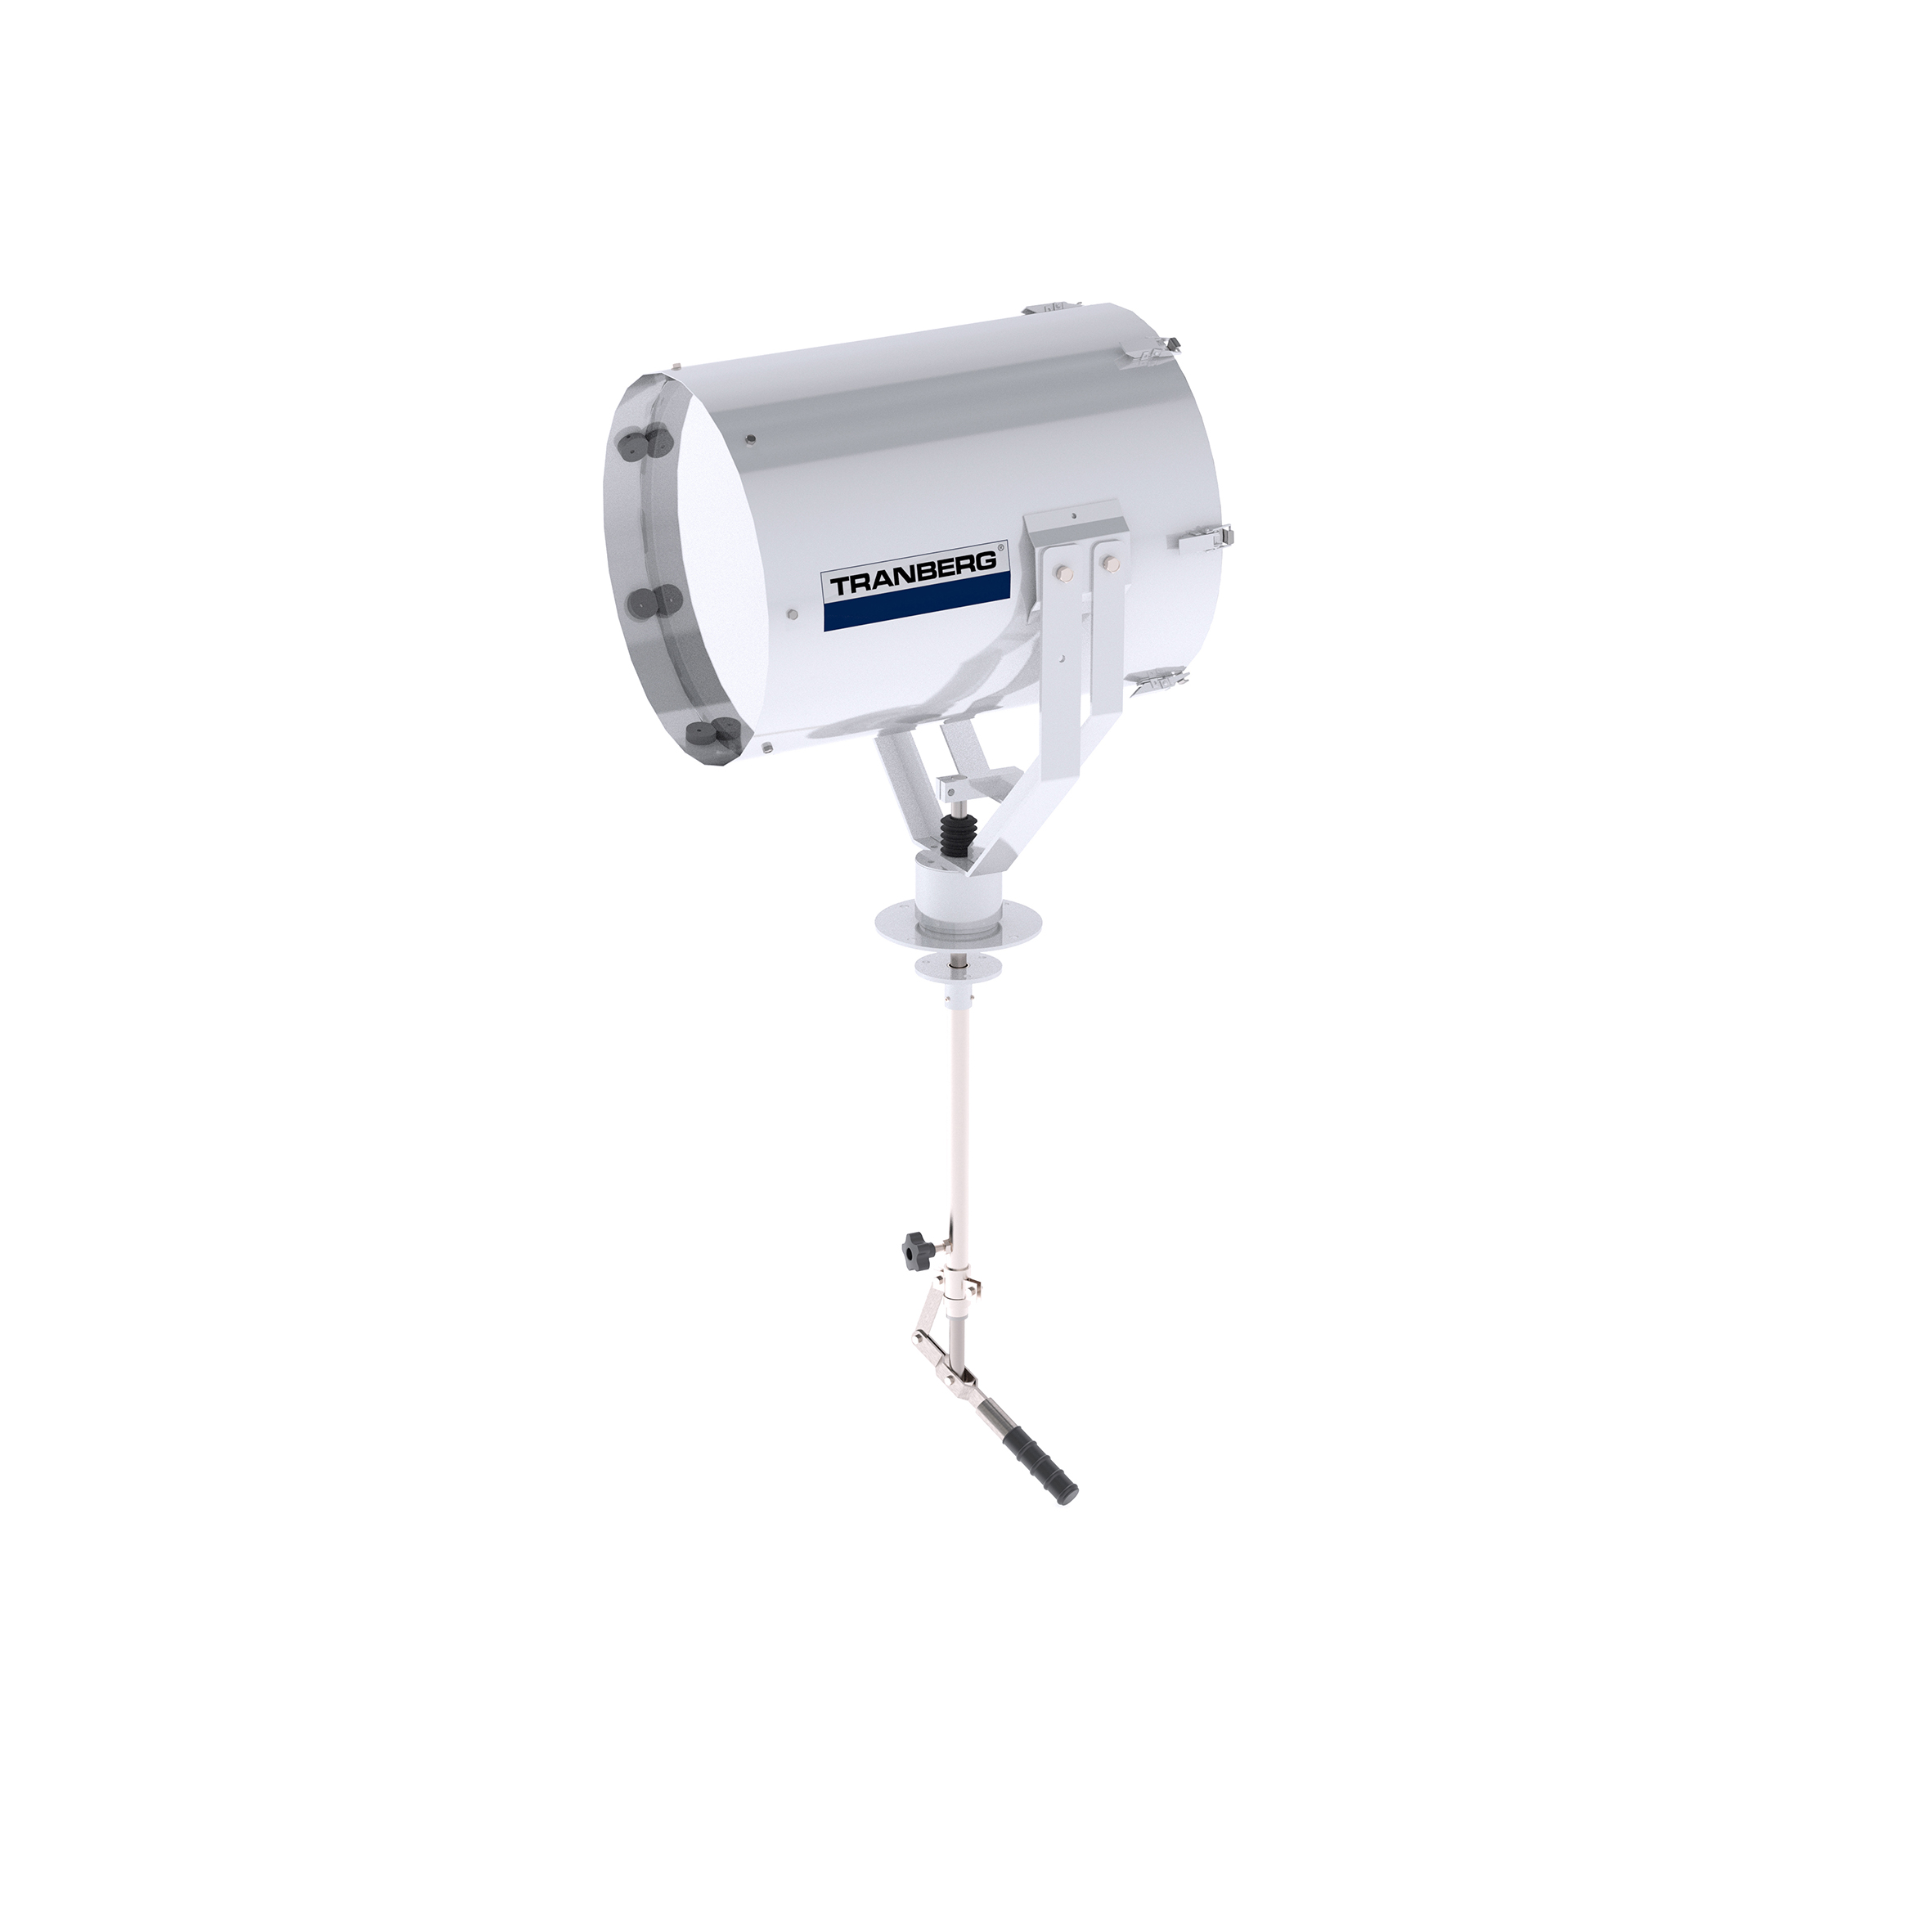 TEF 2630 Searchlight: Halogen 250W bulb incl, 24V, Bridge Controlled, Stainless Steel photo